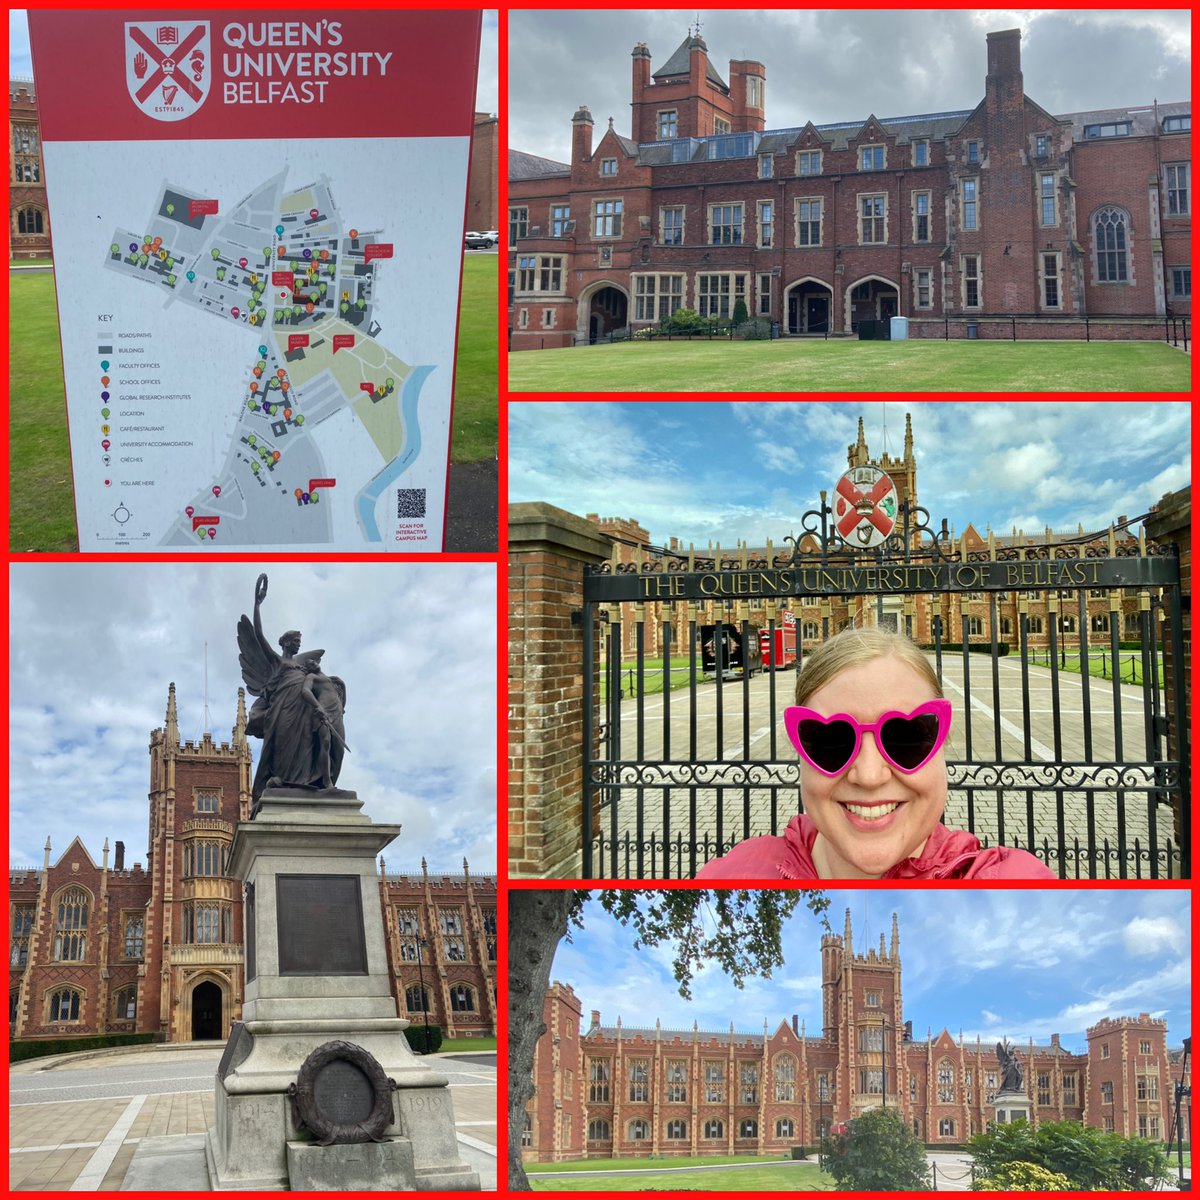 Today I set foot on the campus of @QUBelfast for the very first time, and it was as beautiful as the photos and videos had led me to imagine. Can’t wait to begin grad school here! #QUB #QueensUniversityBelfast #postgrad #campustour #BeckyInBelfast